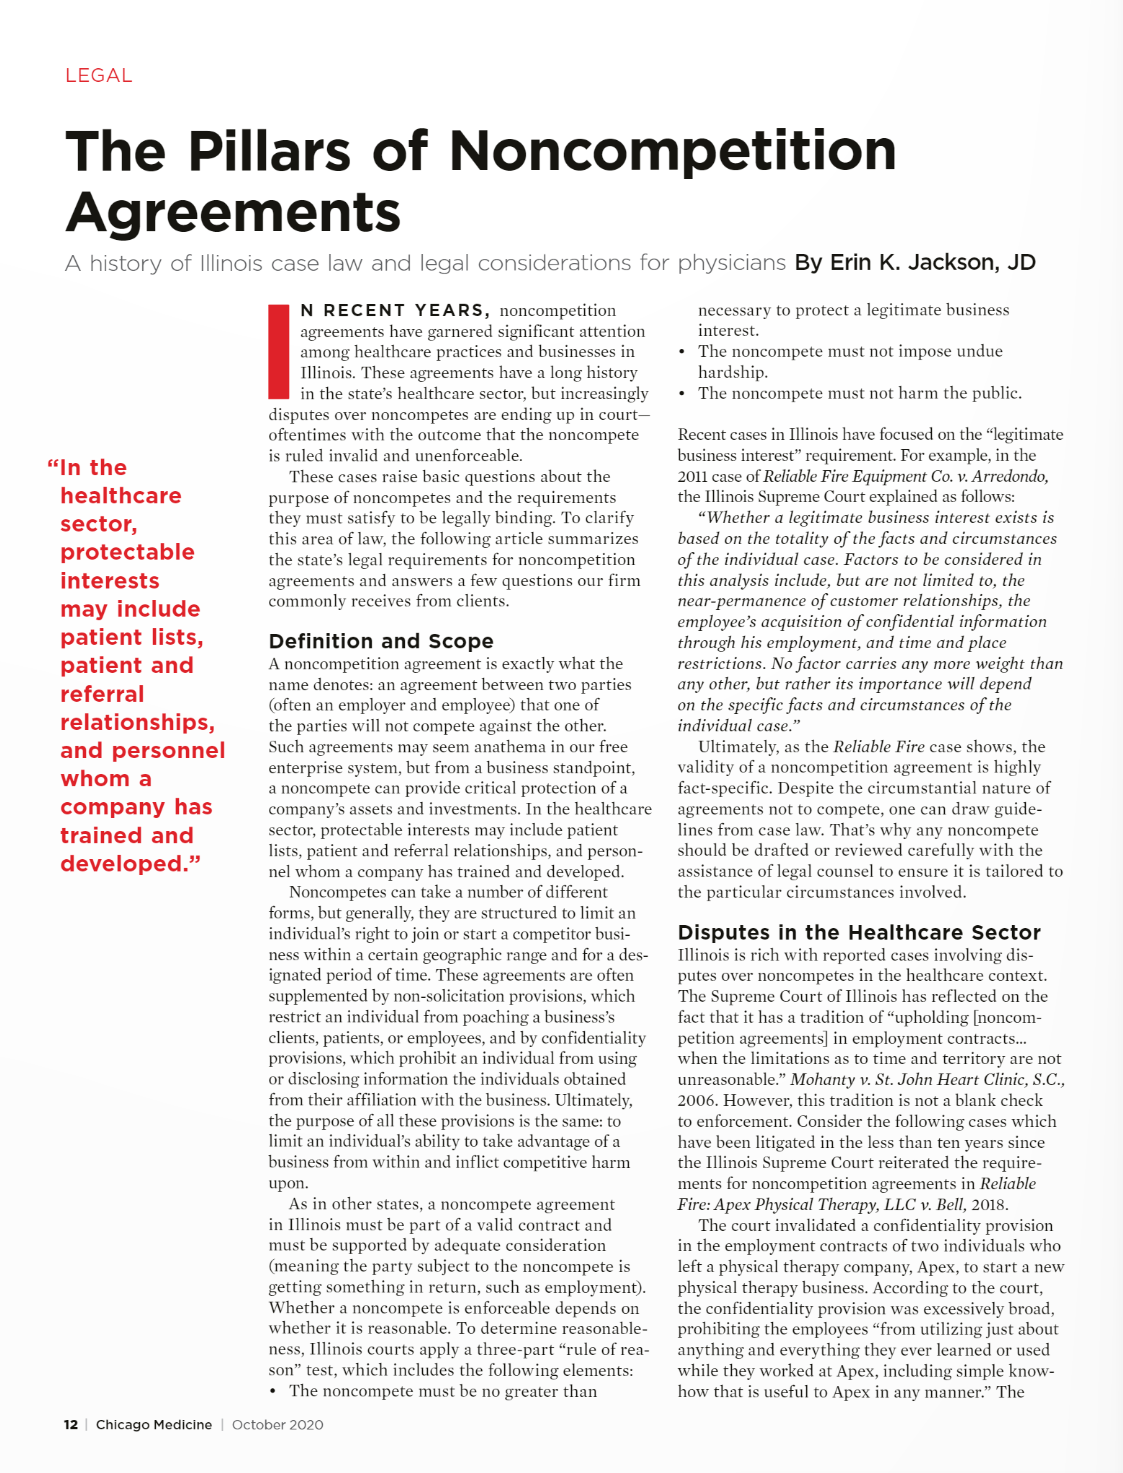 The Pillars of Noncompetition Agreements